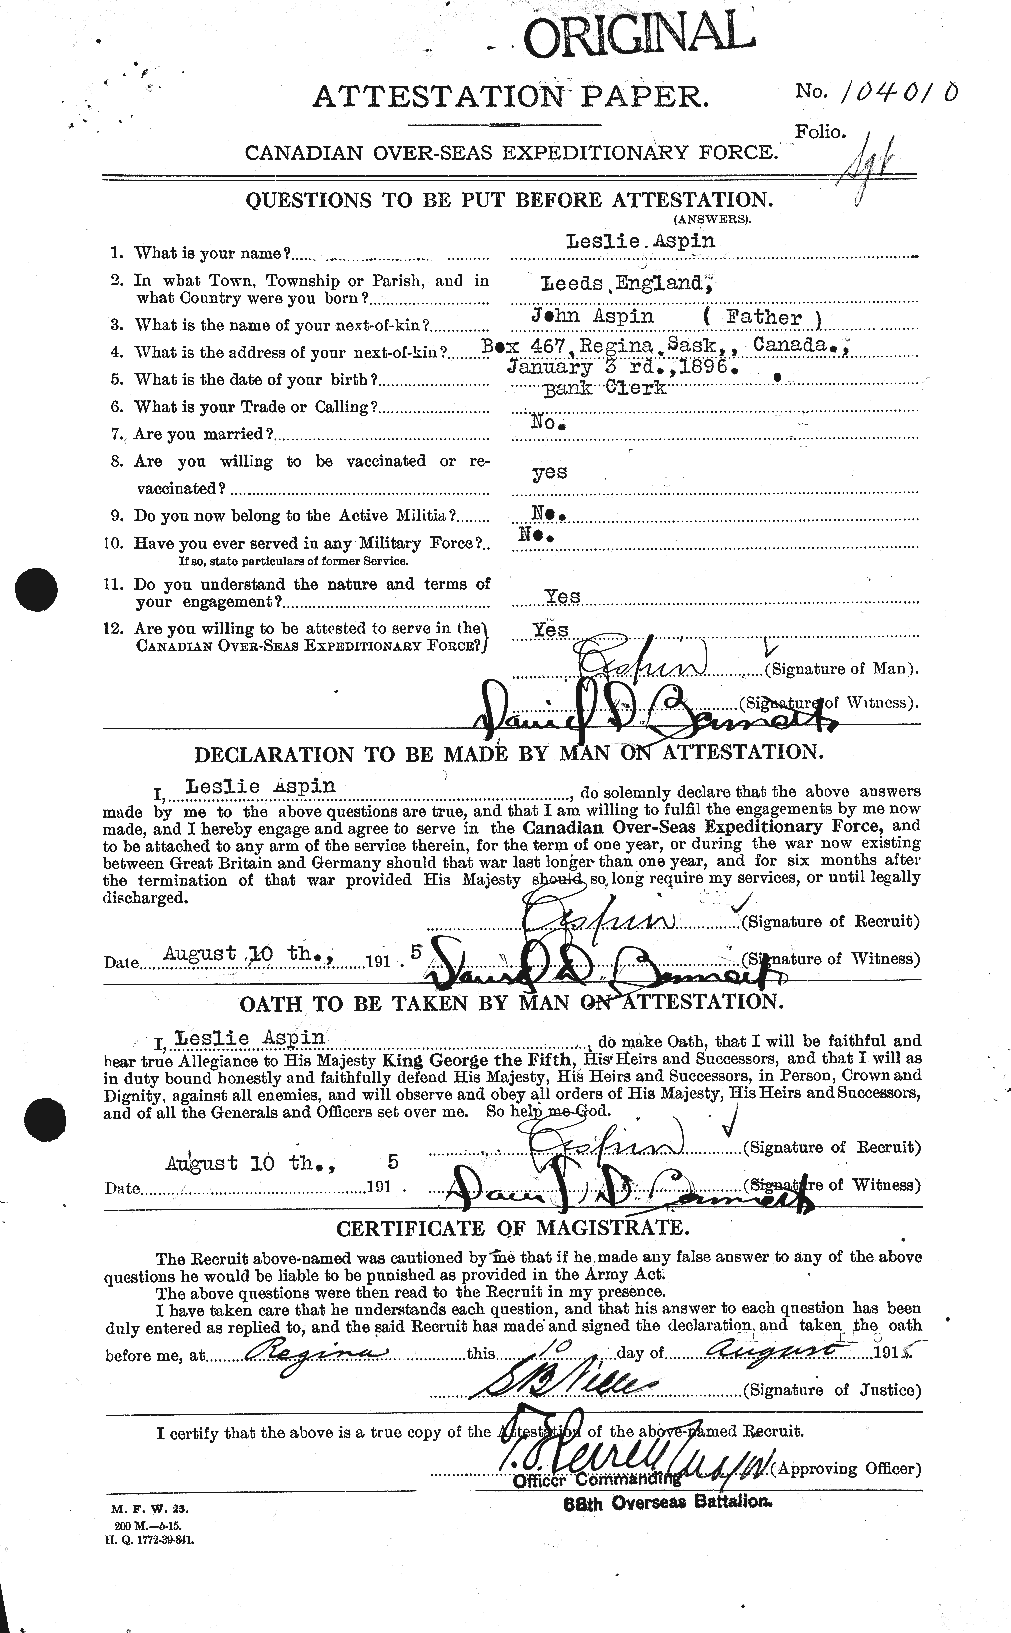 Personnel Records of the First World War - CEF 223584a